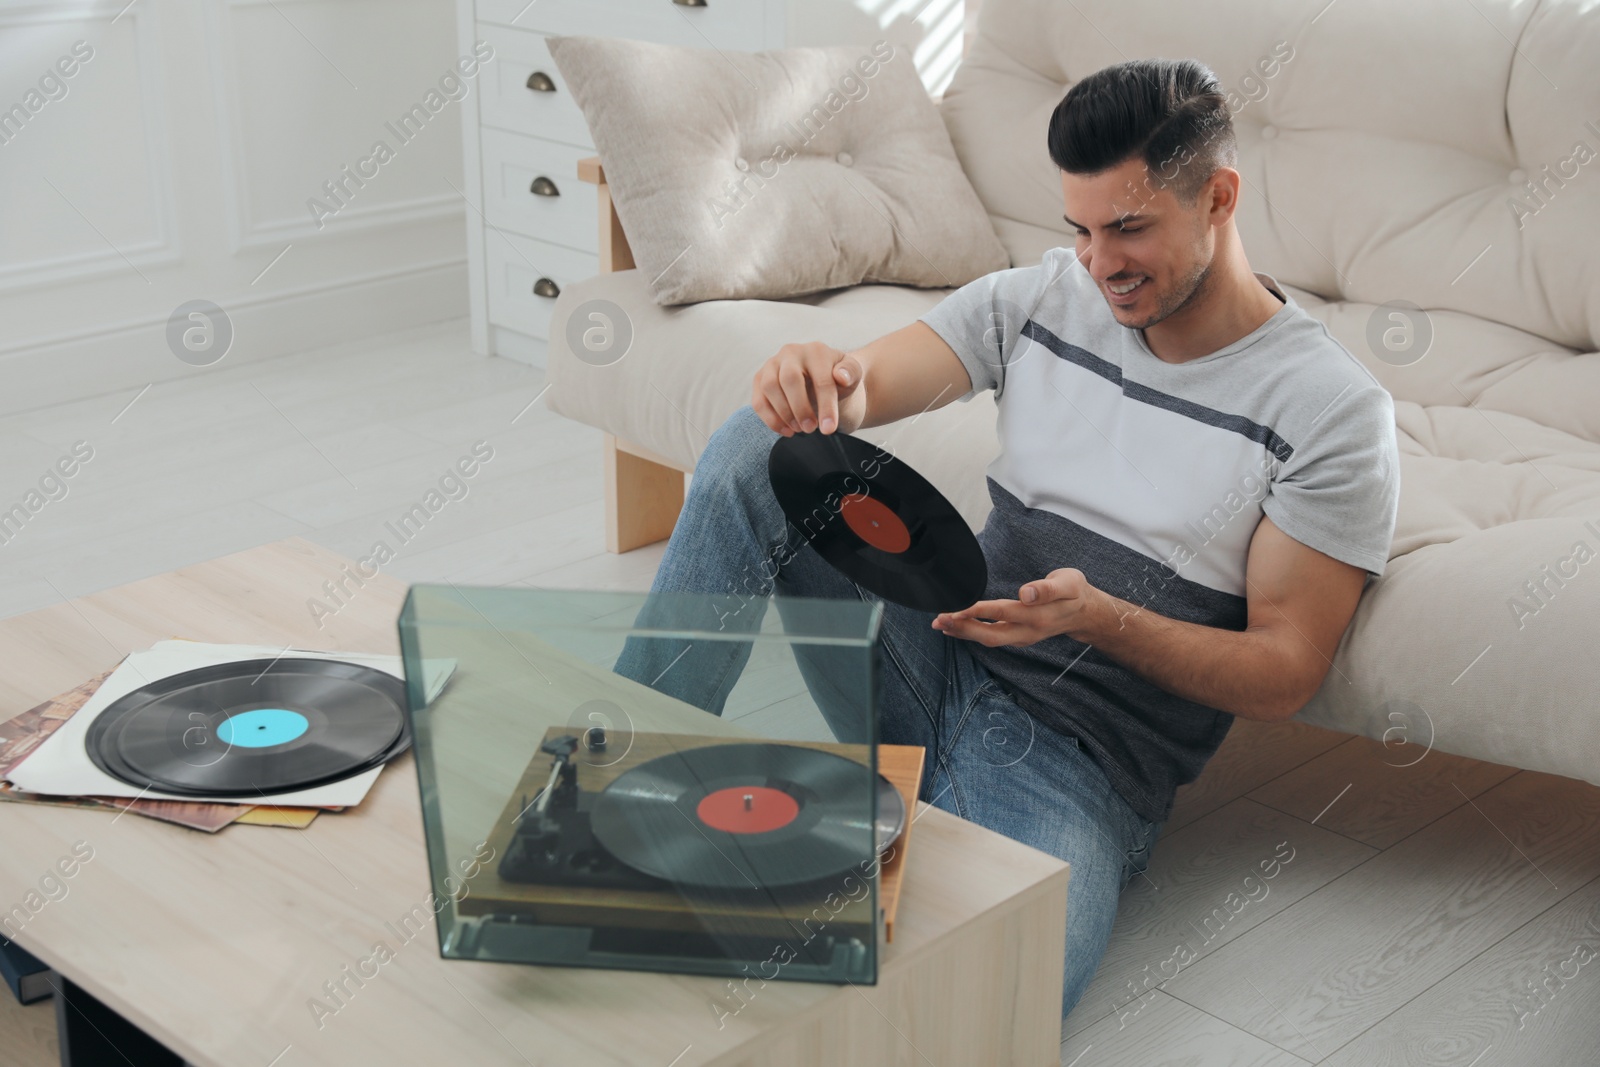 Photo of Happy man listening to music with turntable at home